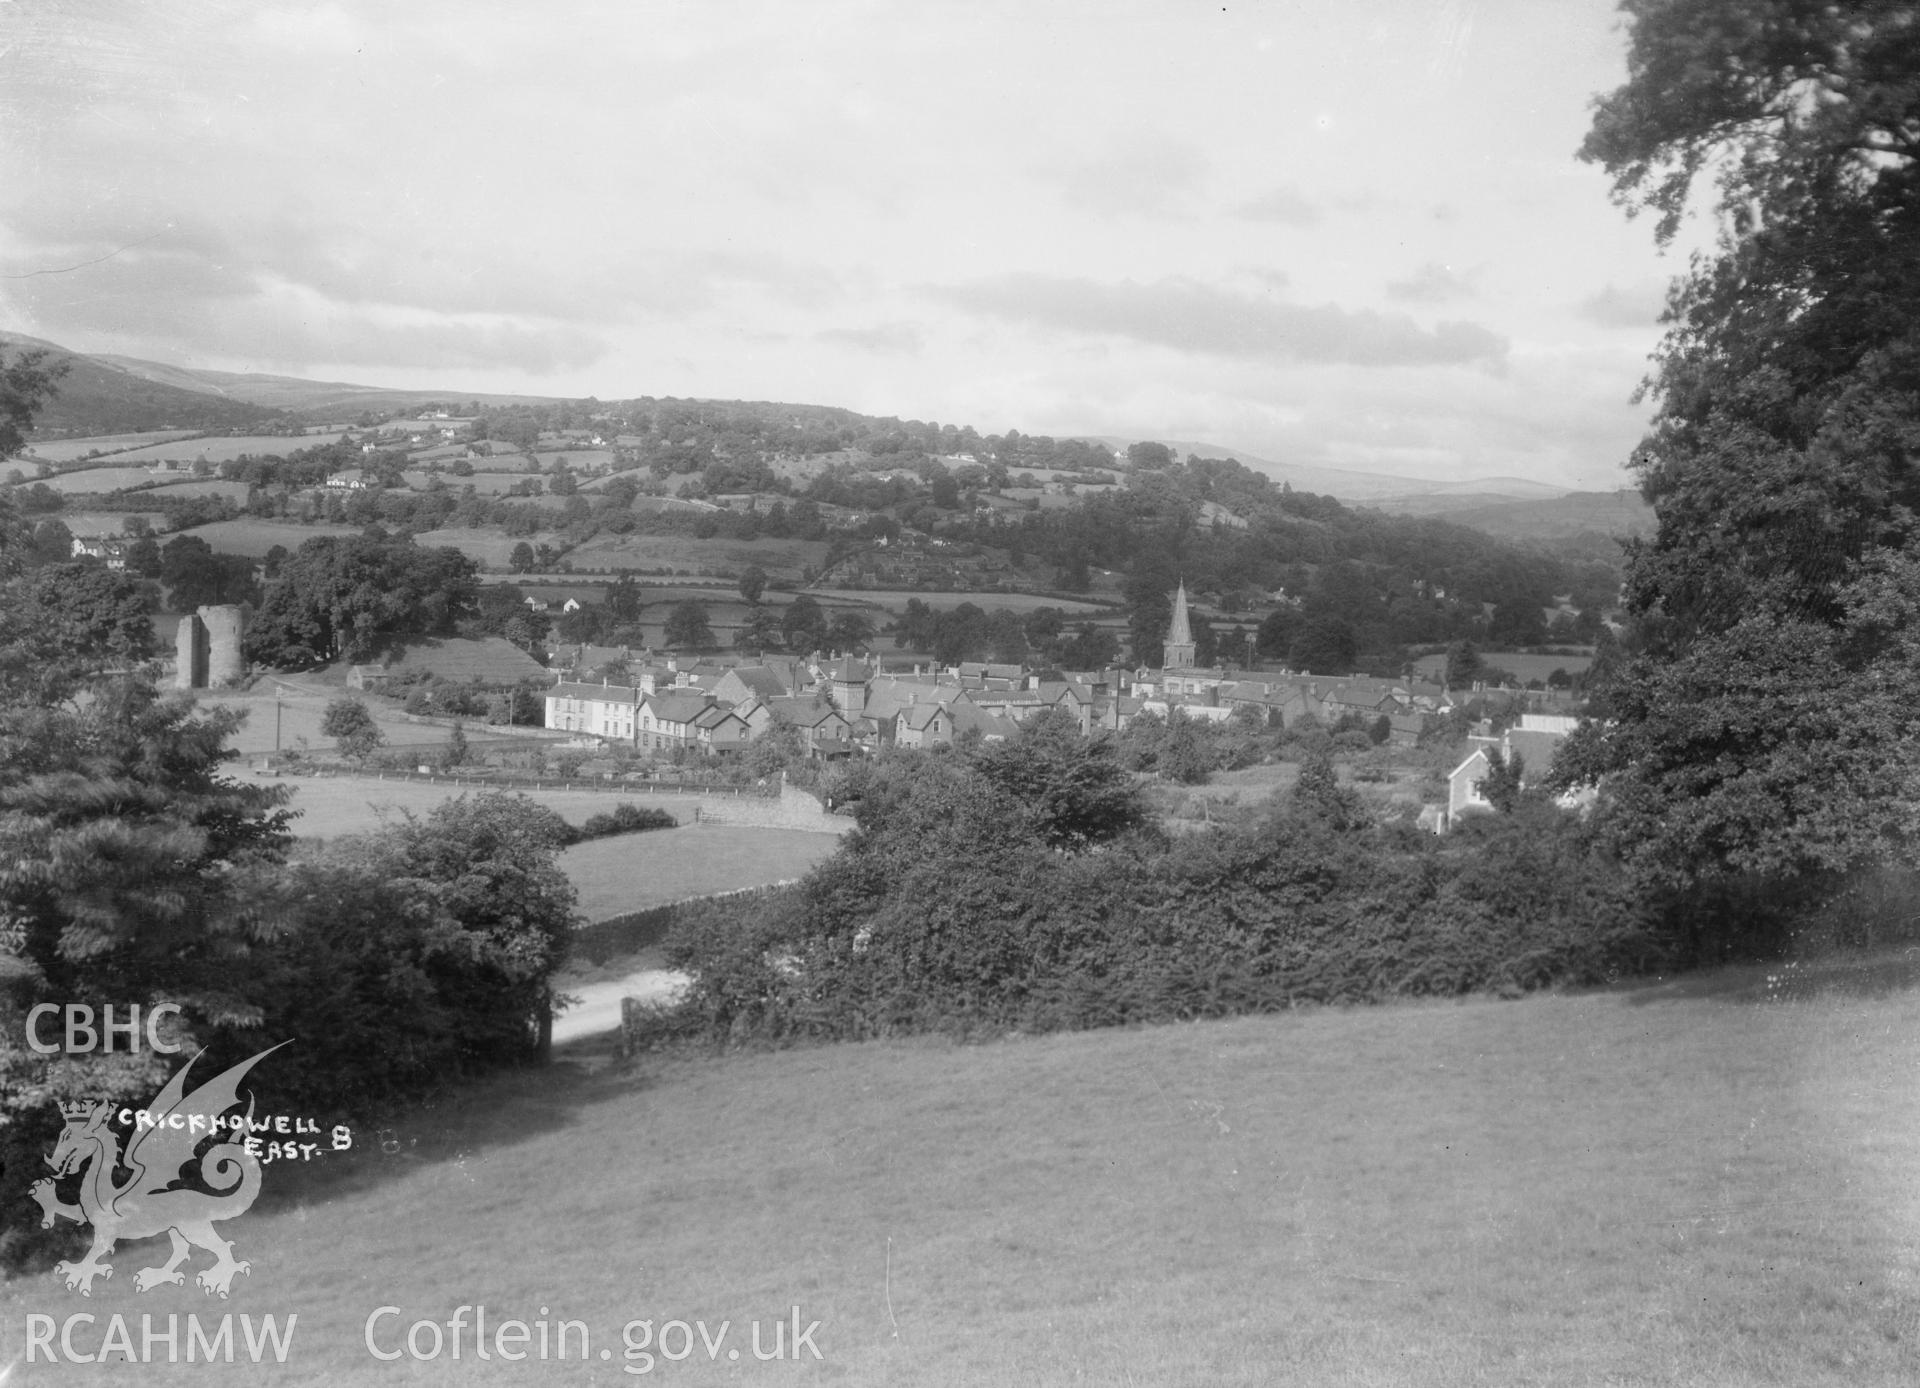 Landscape view of Crickhowell Town from the east,  taken by W A Call circa 1920.